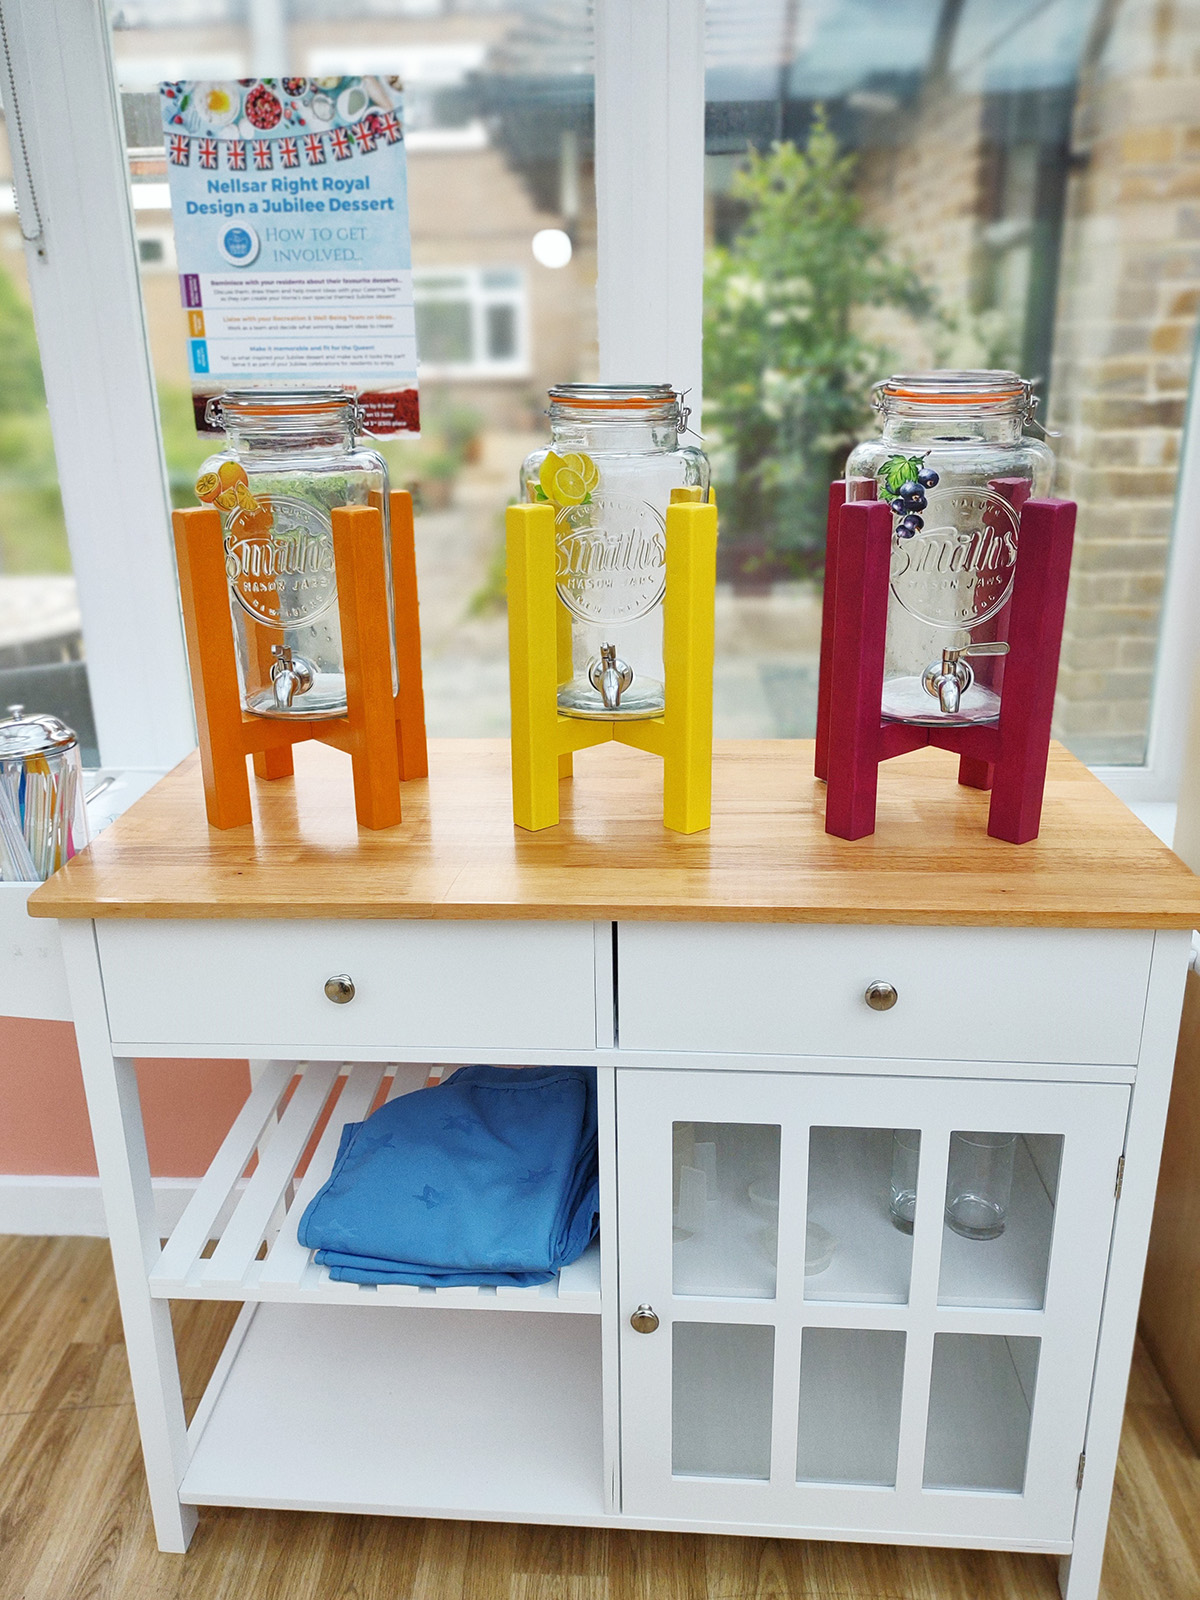 Hydration station fruit juice stands at Loose Valley Care Home